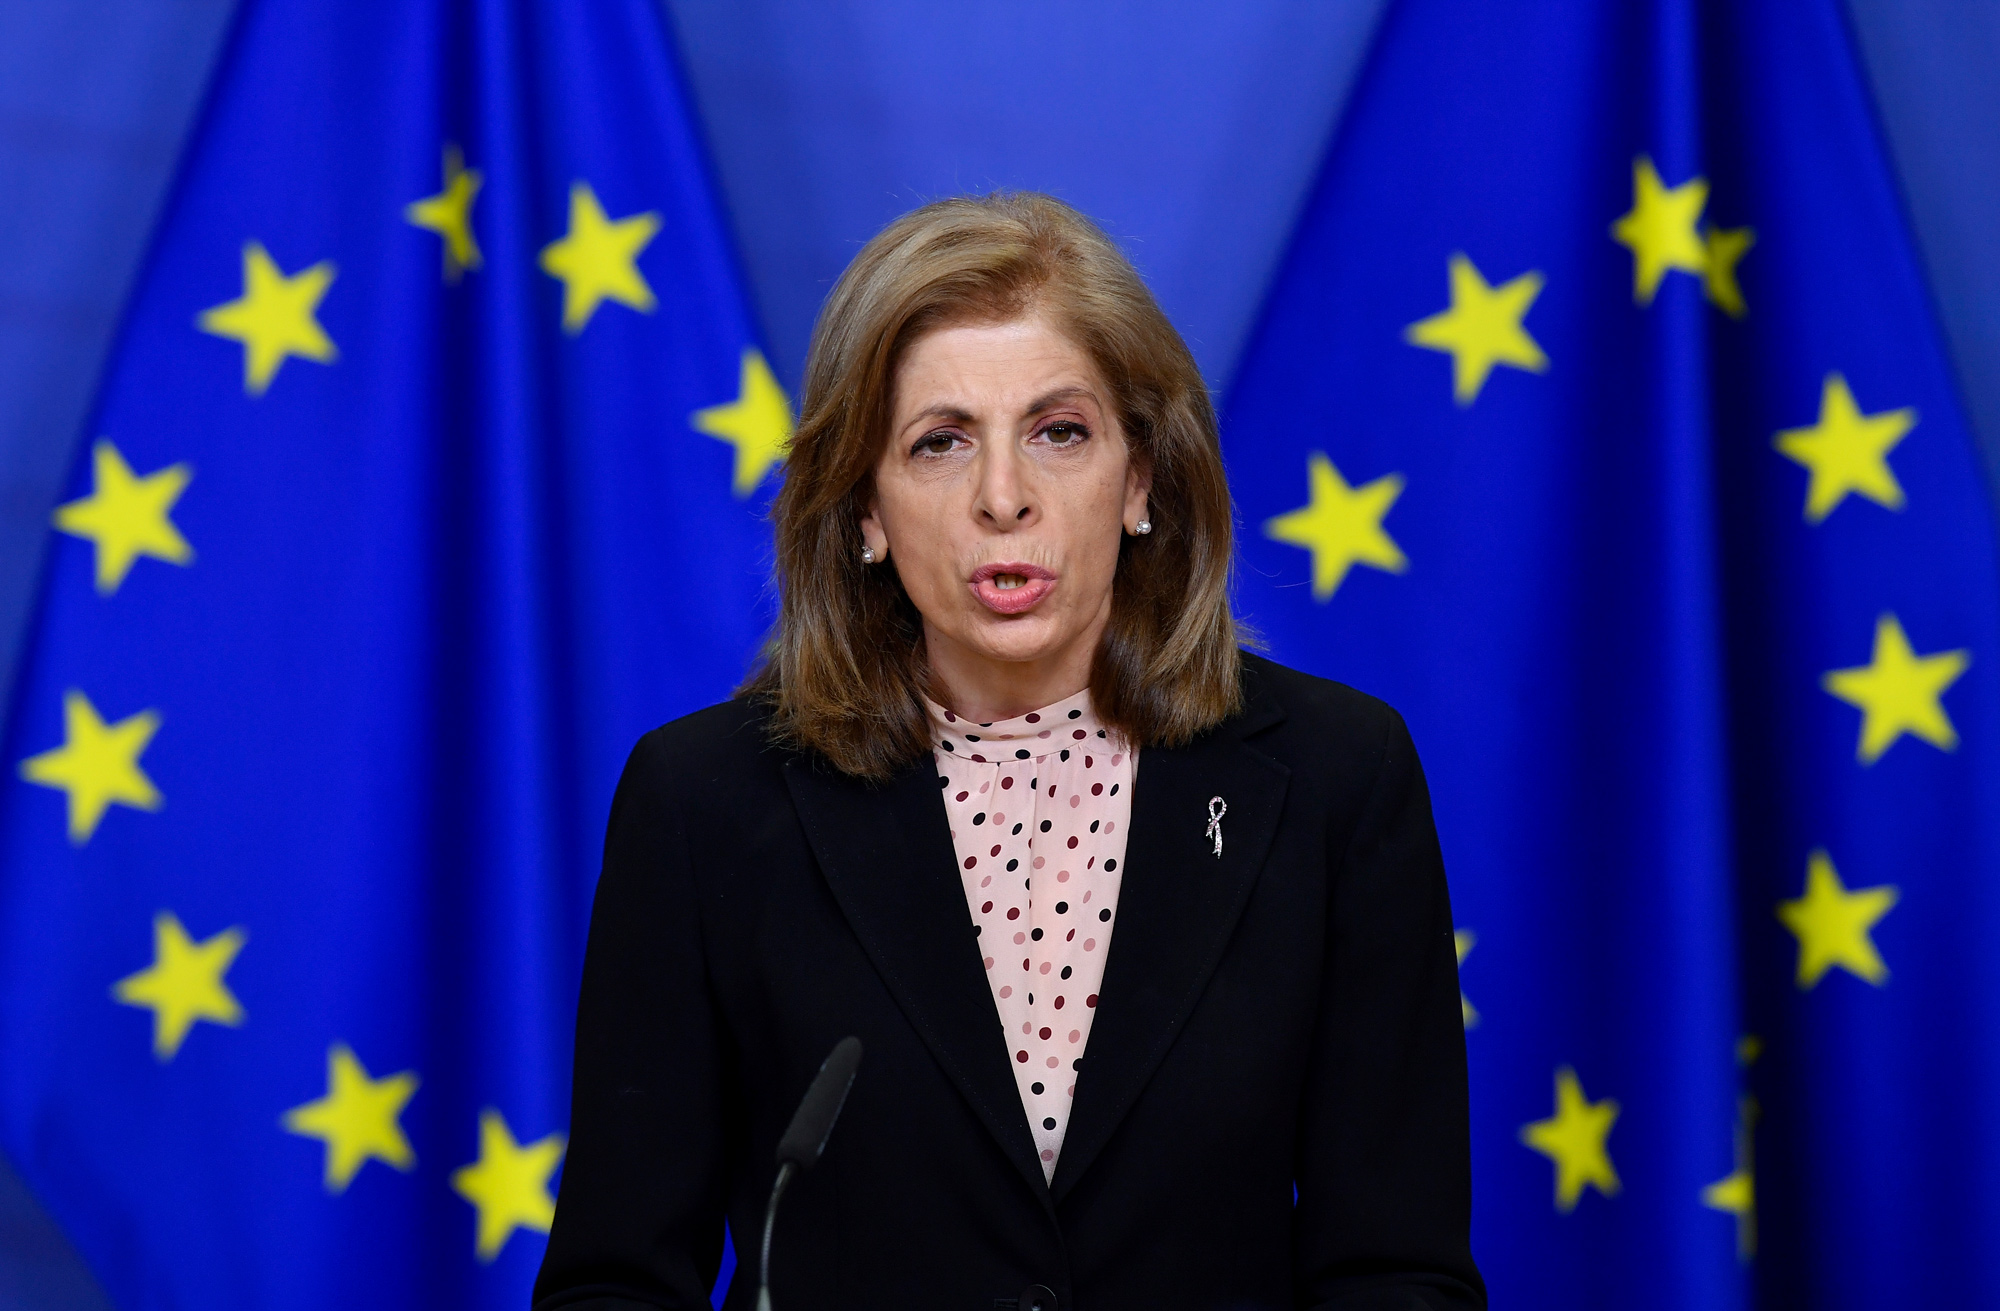 European Health Commissioner Stella Kyriakides gives a statement at the European Commission headquarters in Brussels on January 25.